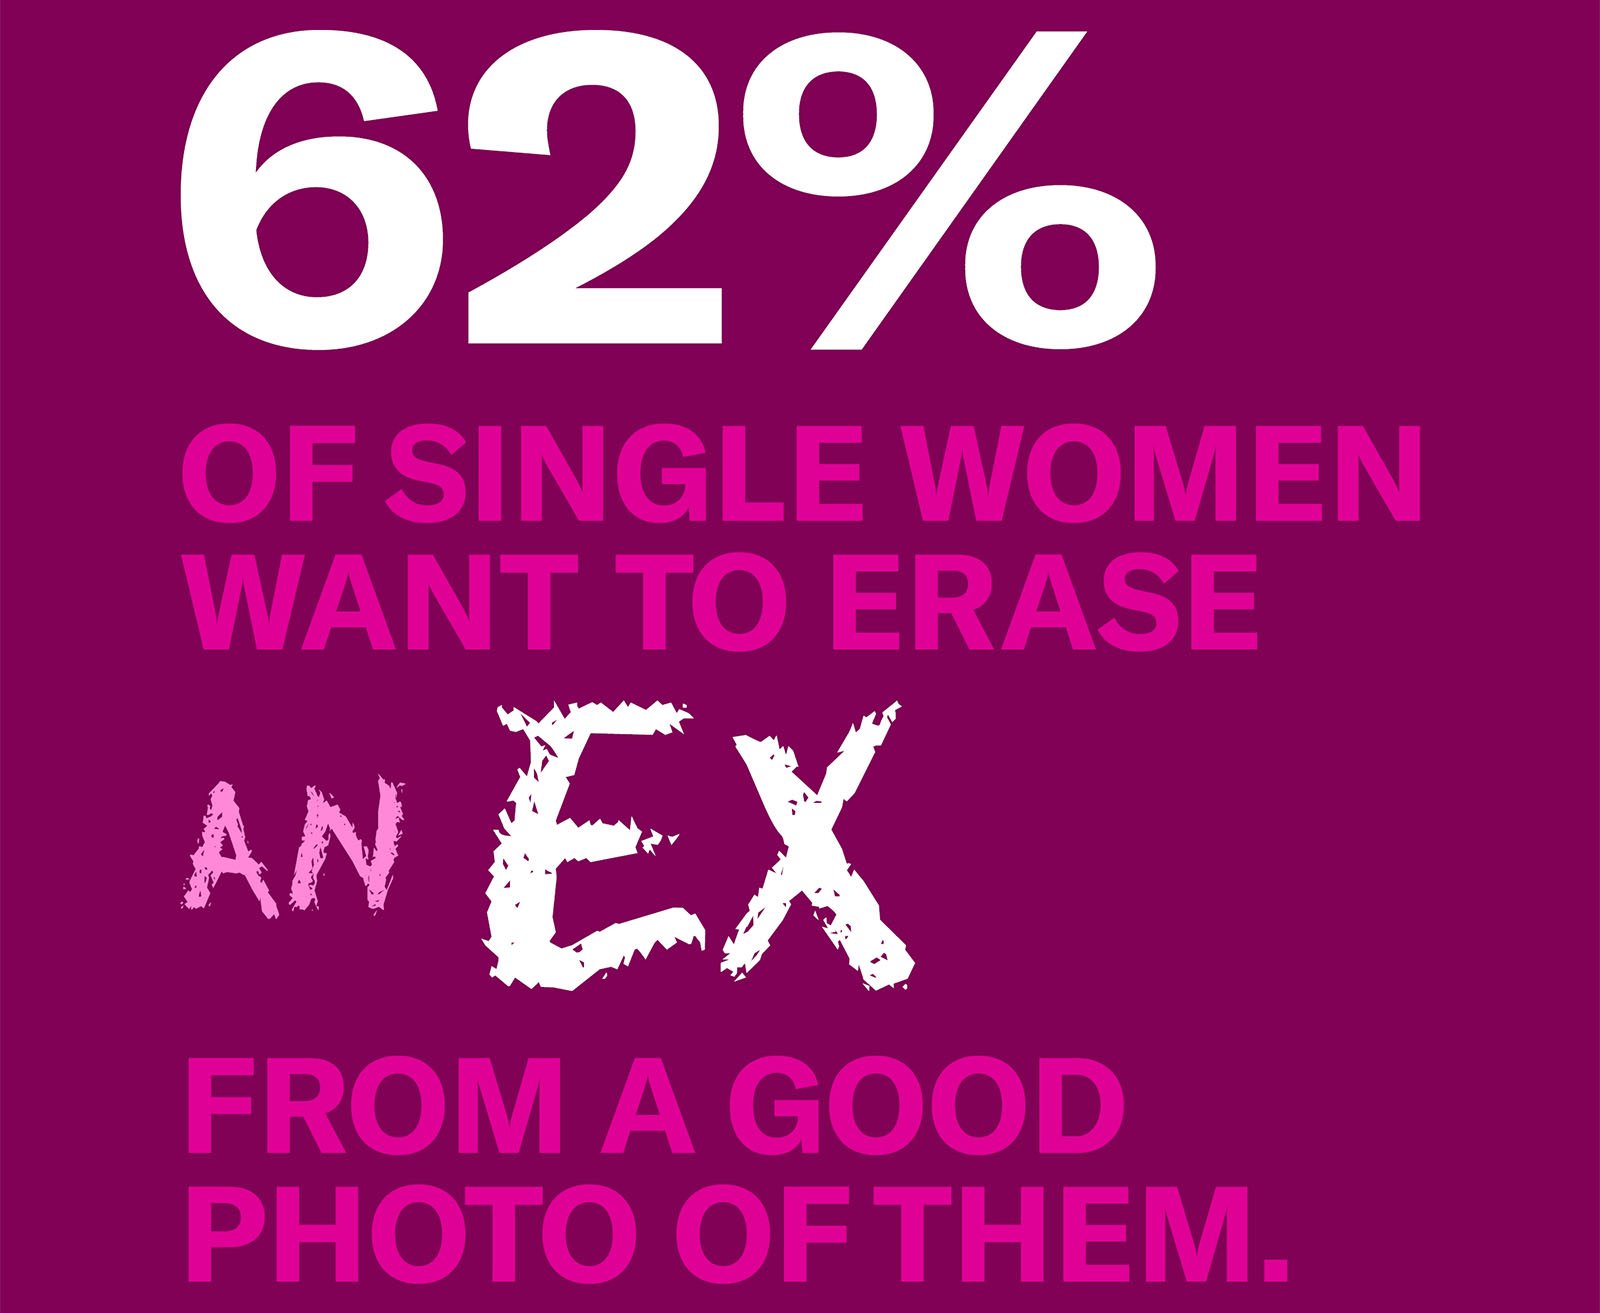 A graphic with a purple background displaying "62% of single women want to erase an ex from a good photo of them" in white text.